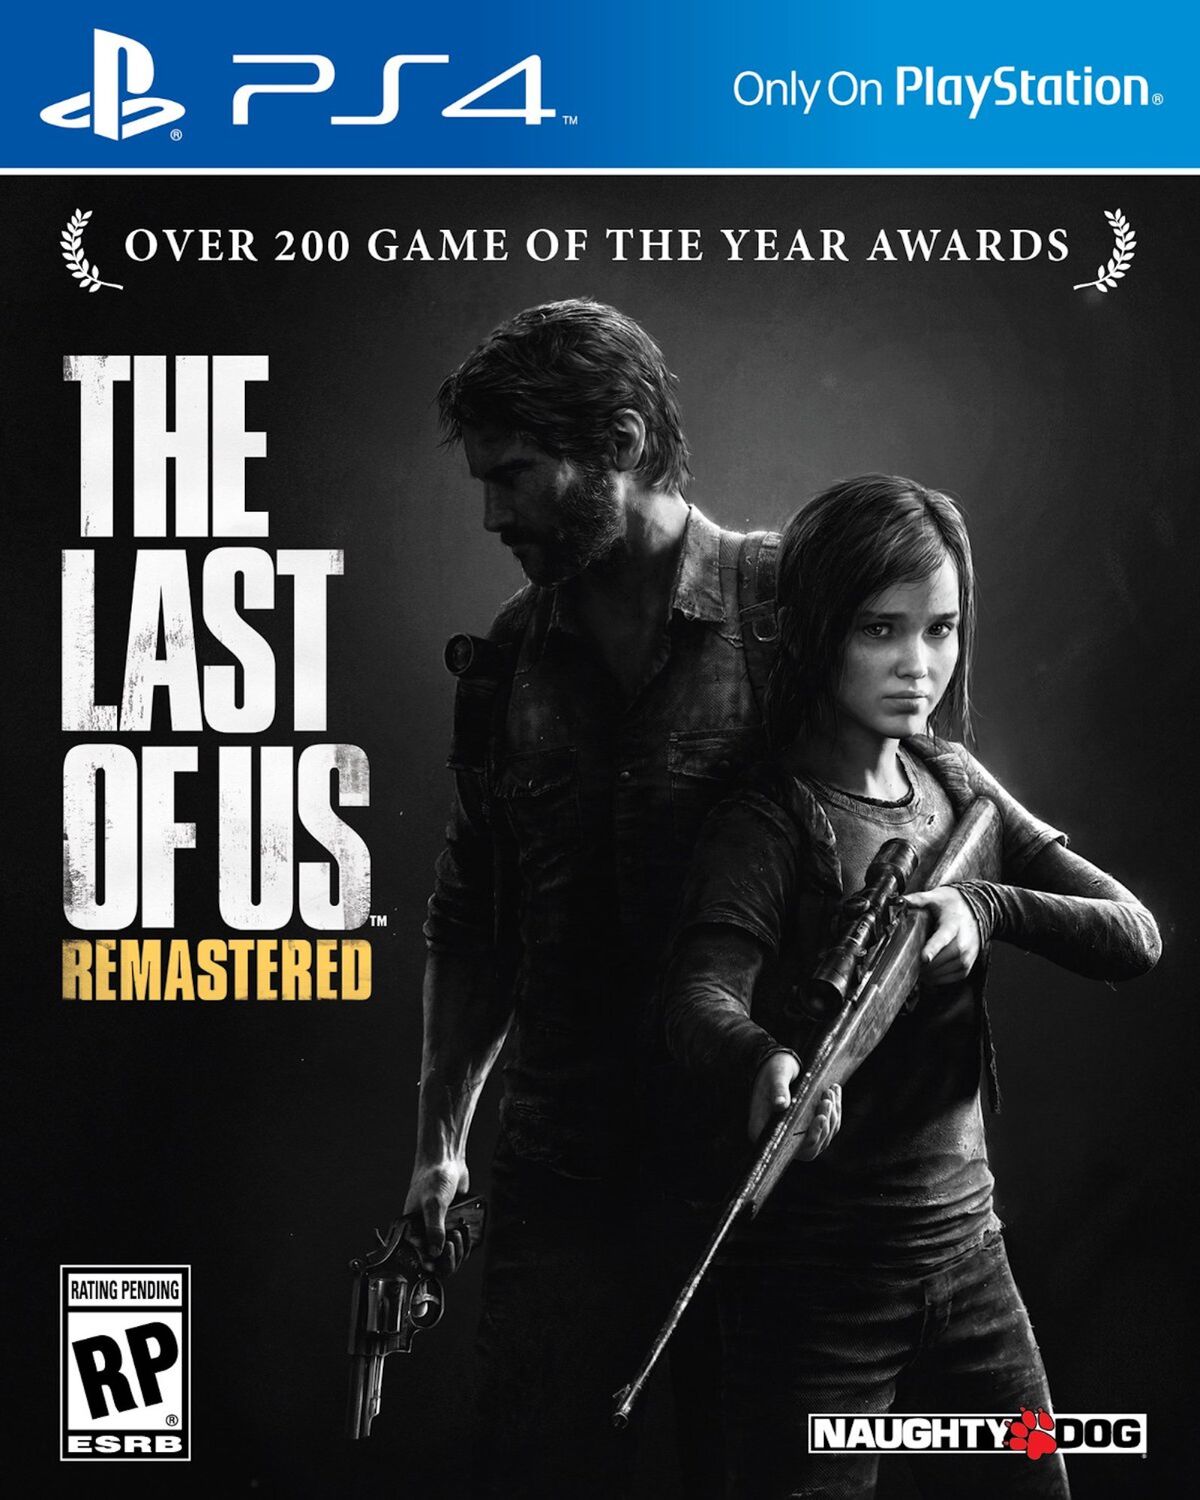 The Last of Us: Part 1 Remake PC FIRST LOOK + UPDATE 